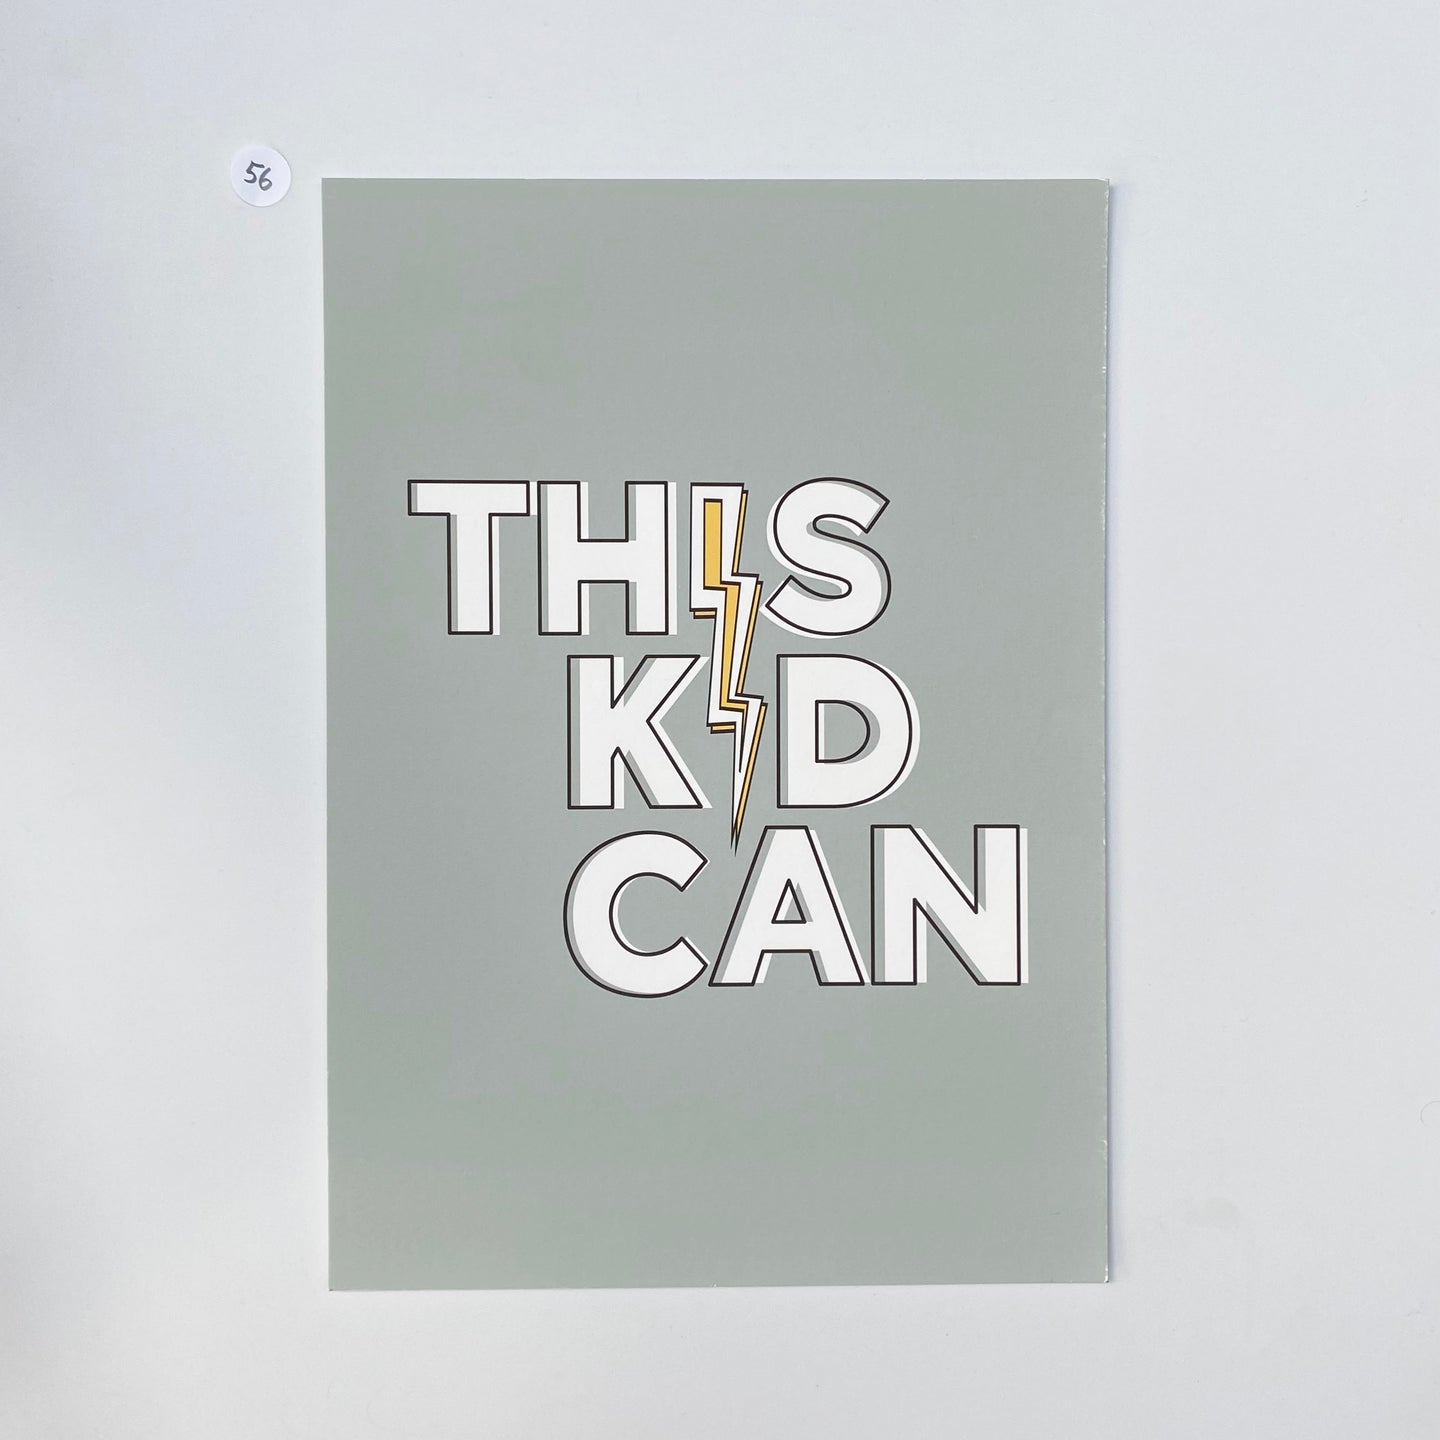 Outlet 56: This Kid Can - A4